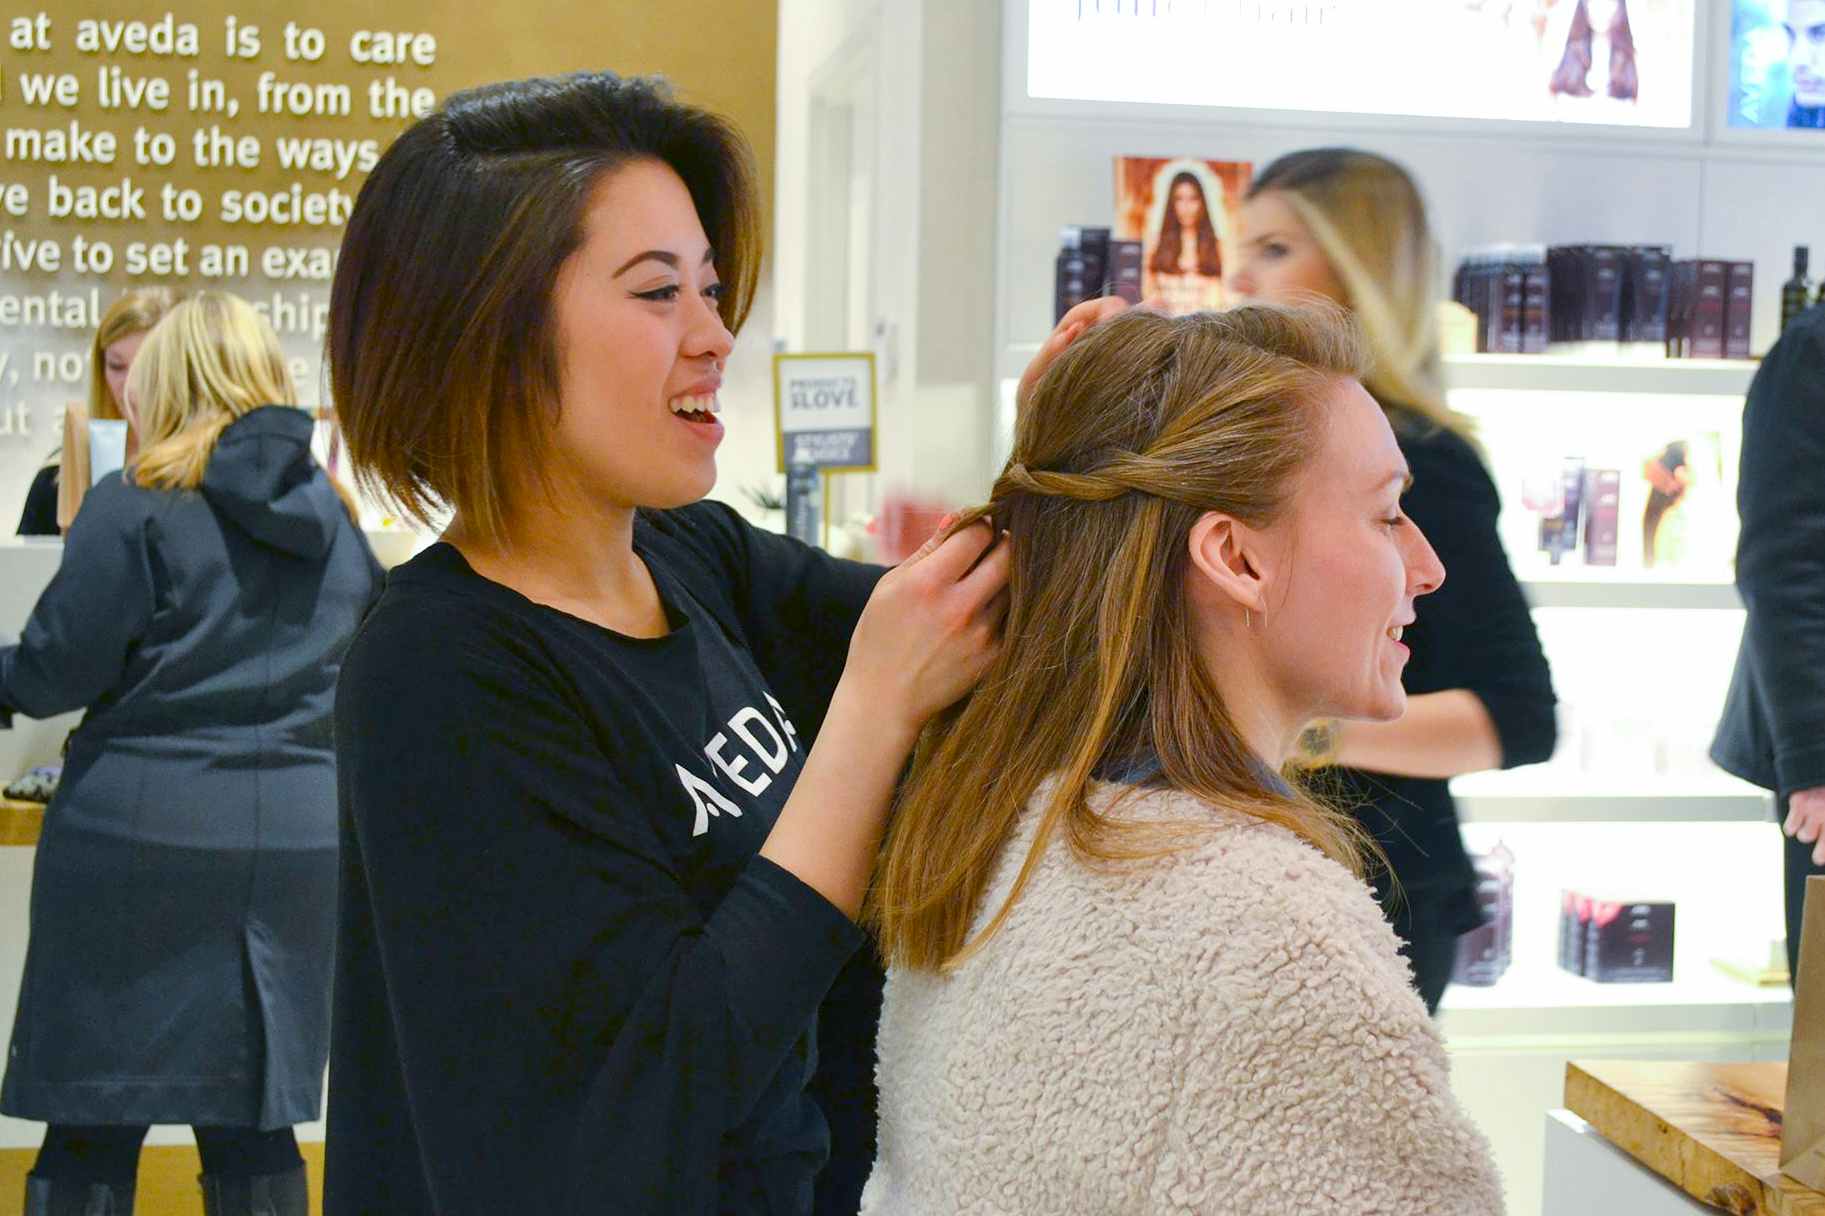 A woman sitting in a salon for a styling session with an Aveda stylist.